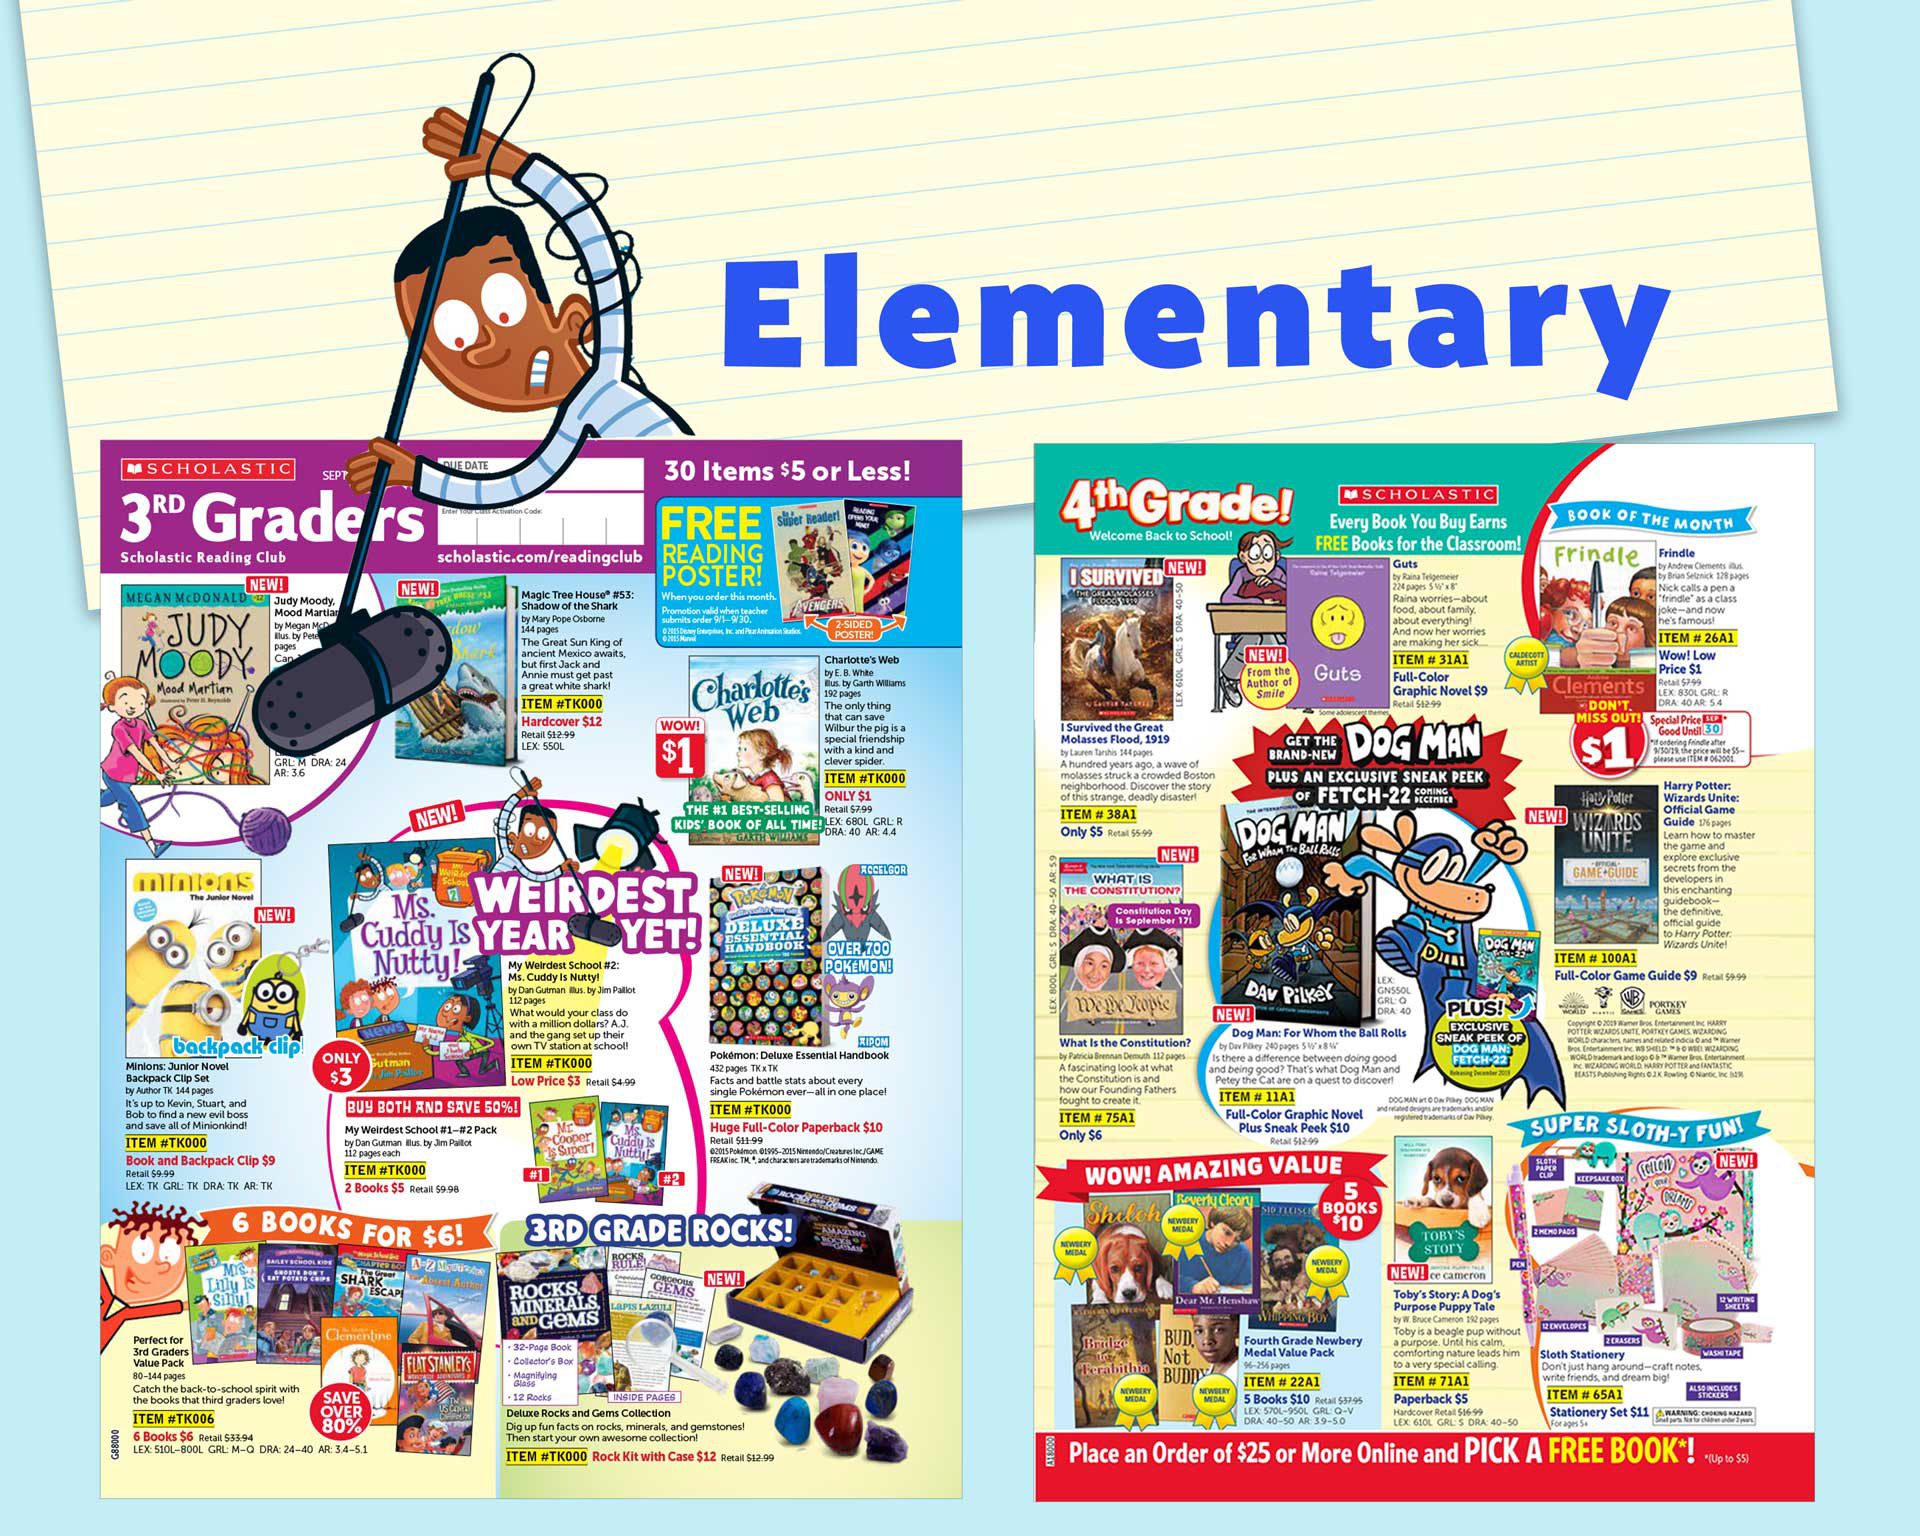 Scholastic Book Clubs flyer reveal: The Book Boys preview October flyers!